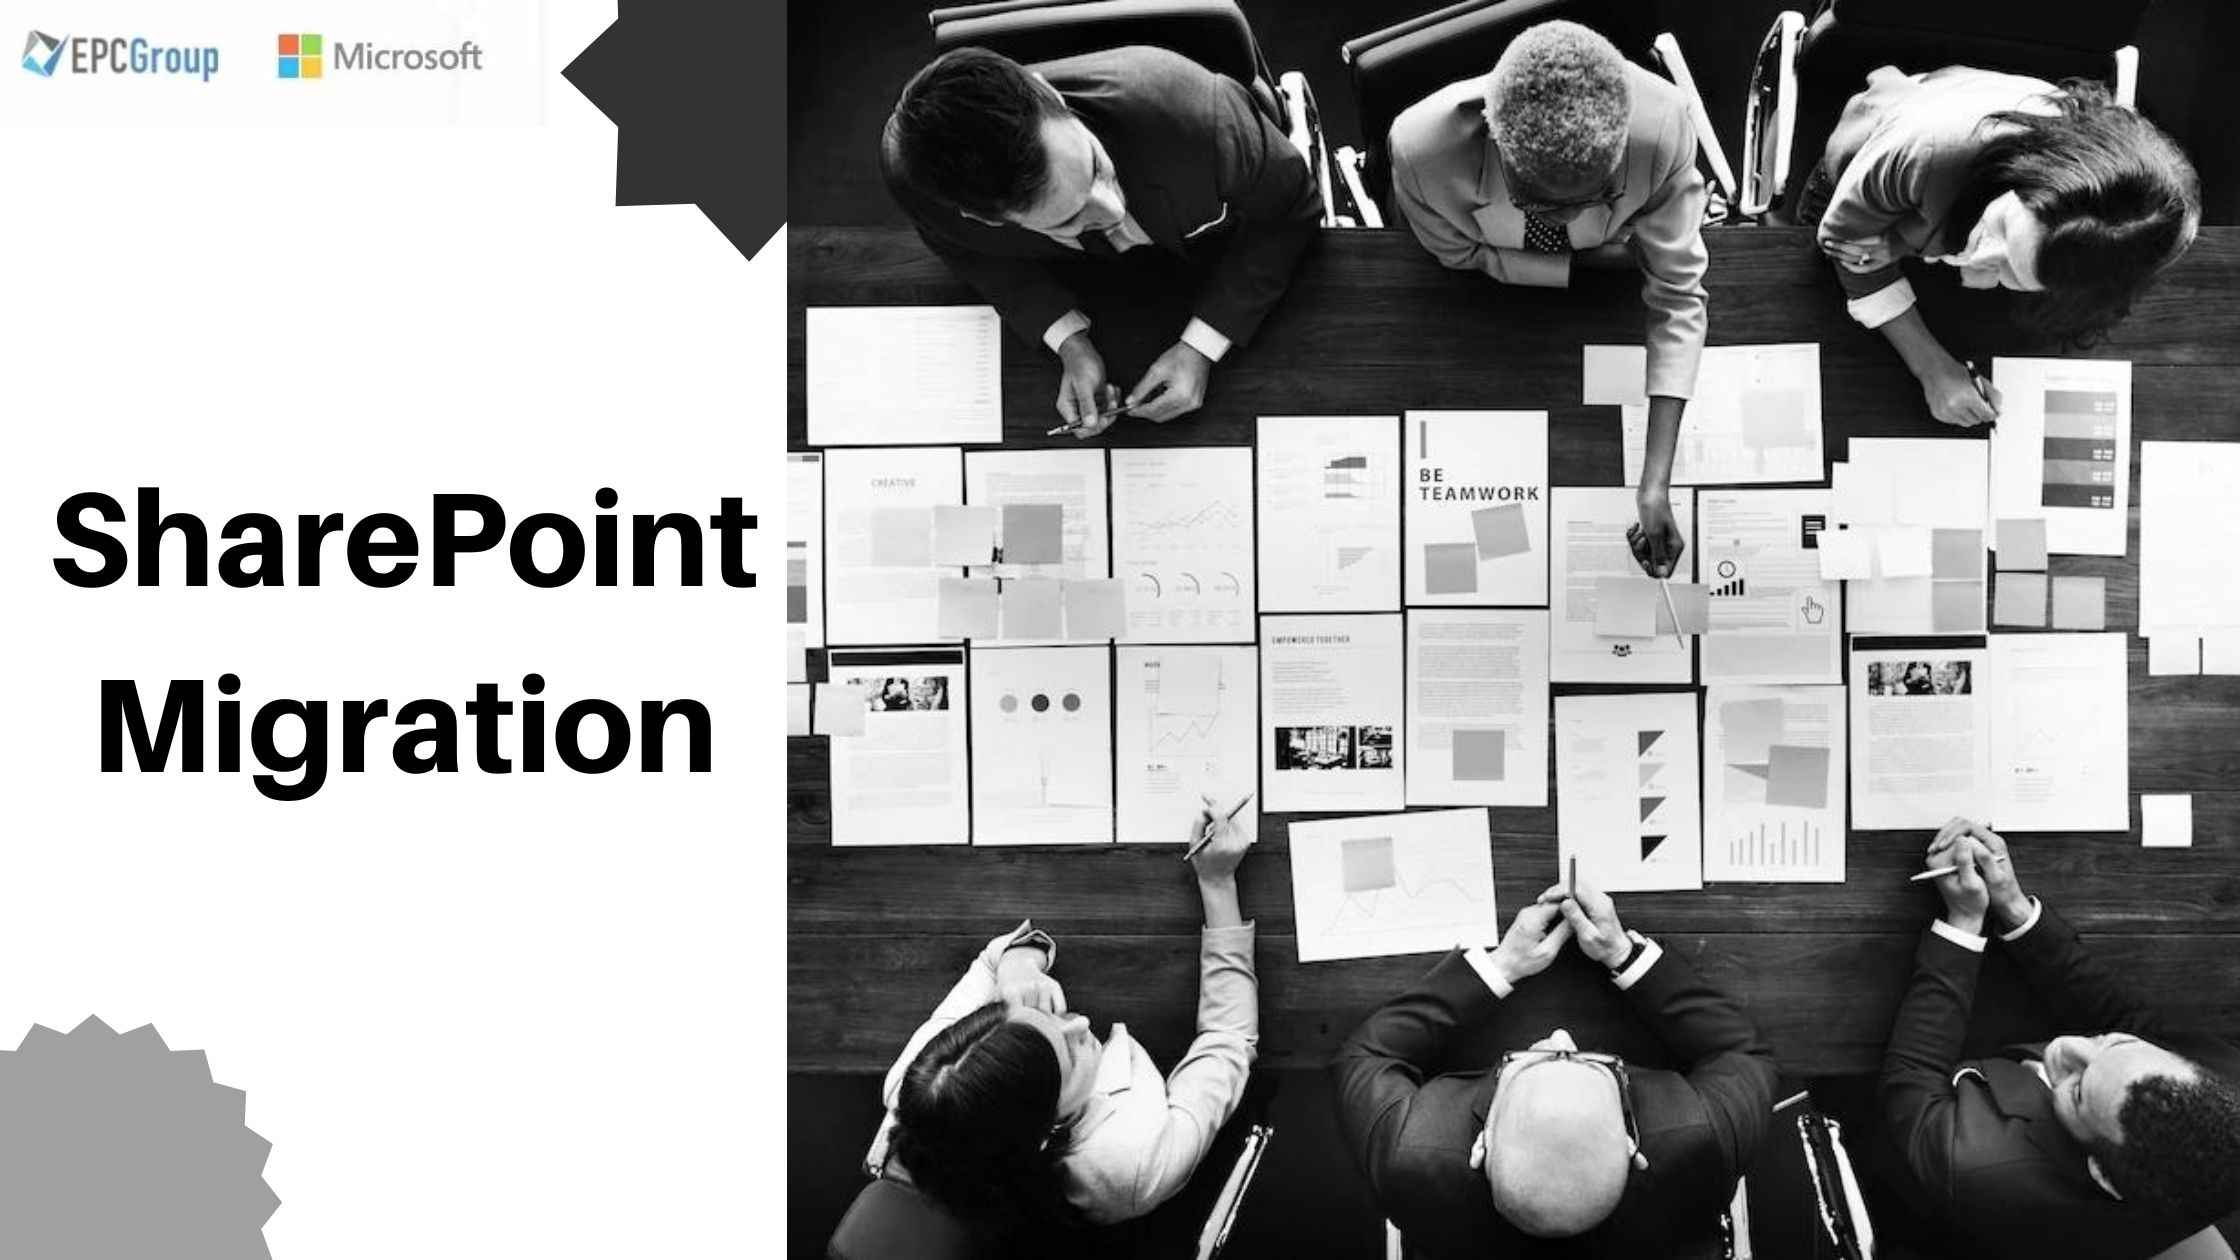 SharePoint Migration Environment: What you need to know - thumb image